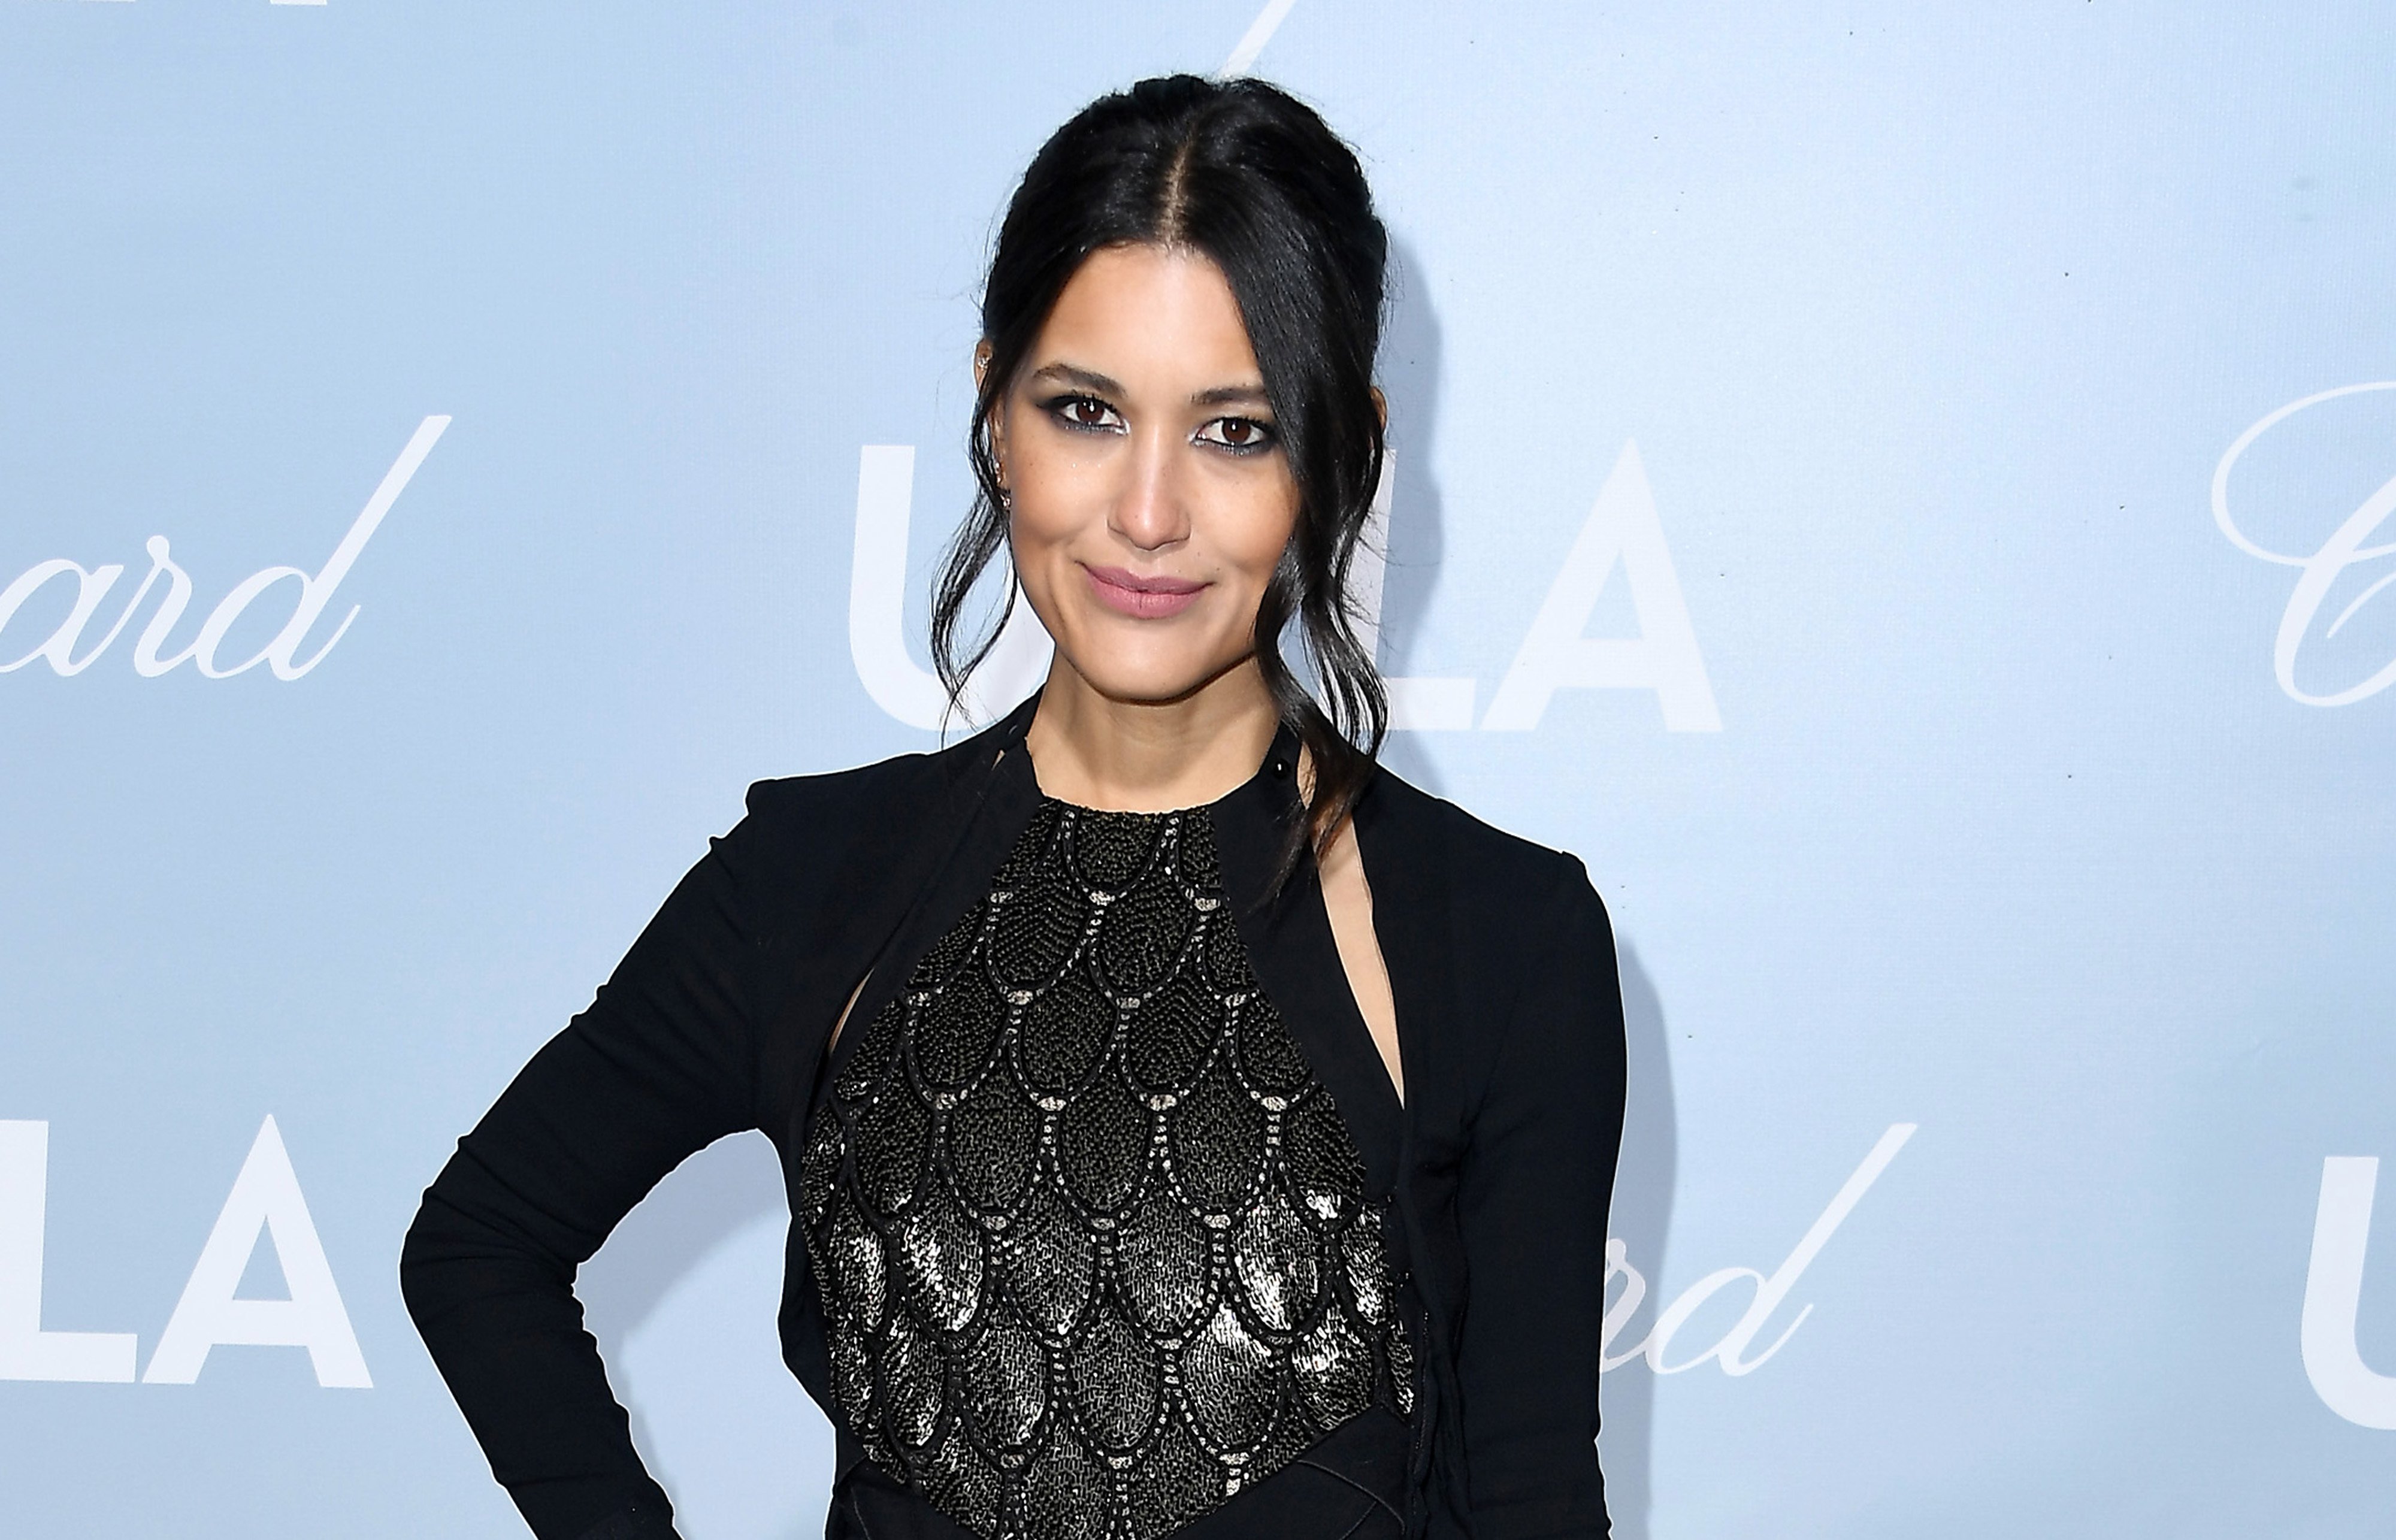 Dexter: New Blood star Julia Jones attends the 2019 Hollywood For Science Gala at Private Residence. Jones has her hair up and is wearing a black dress.